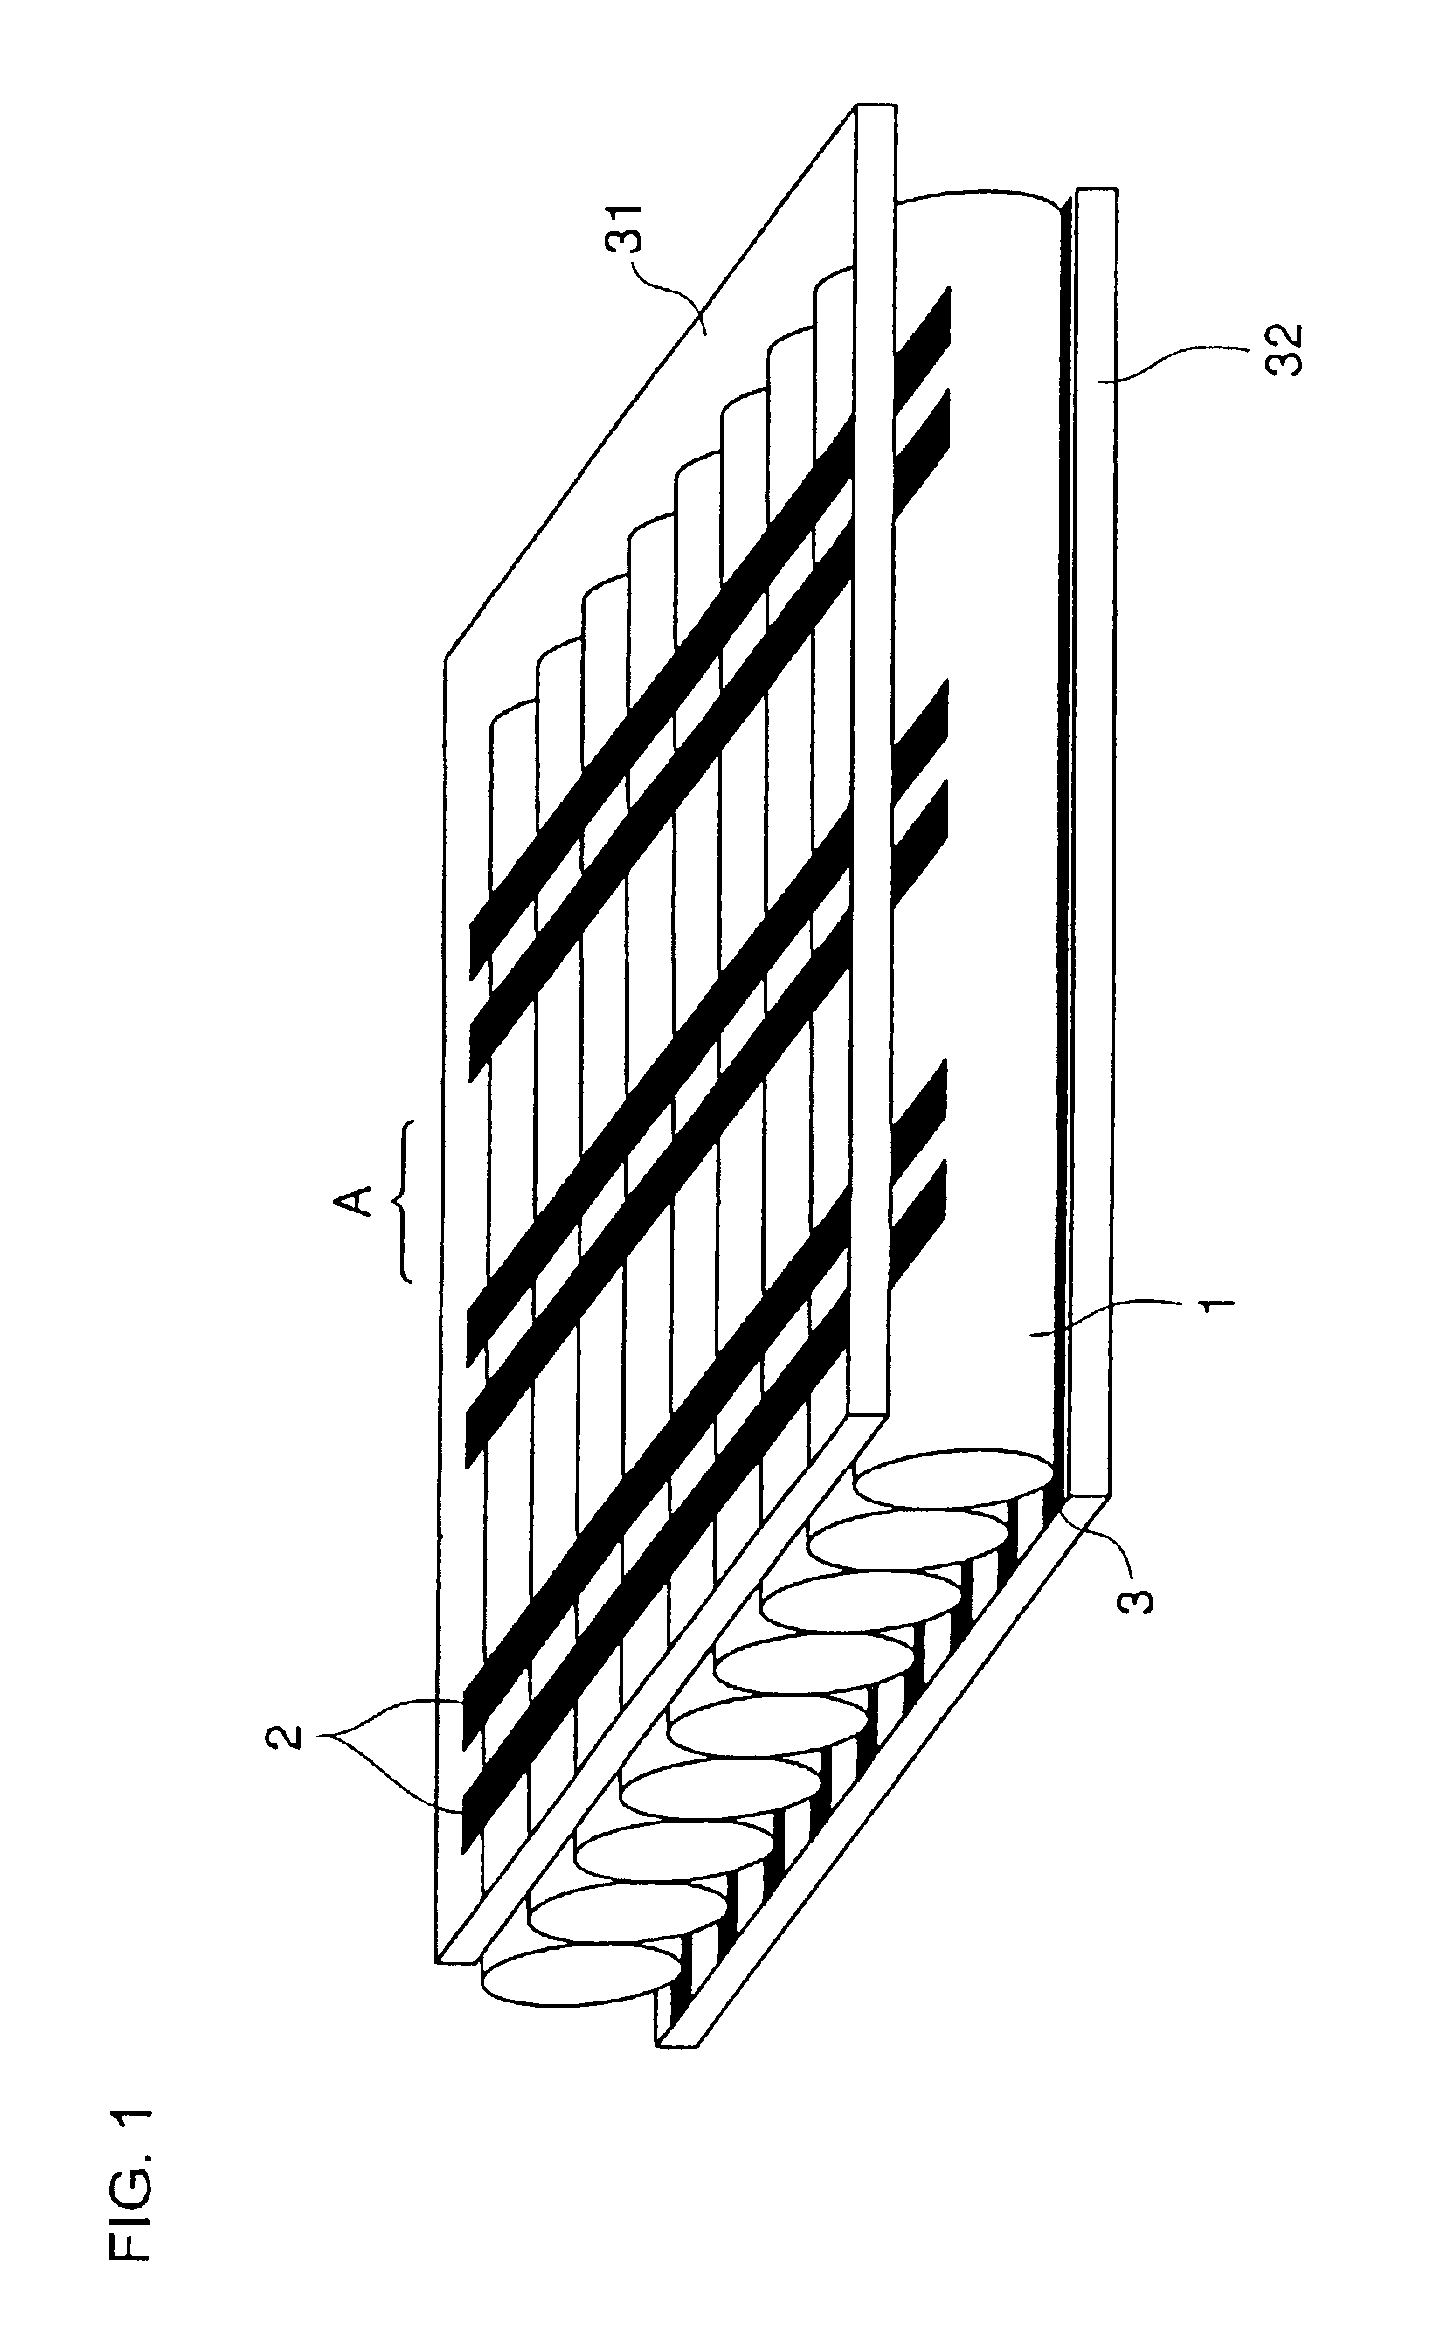 Display device employing gas discharge tubes arranged in parallel between front and rear substrates to comprise a display screen, each tube having a light emitting section as part of the display screen and a cleaning section connected to the light emitting section but displaced from the display screen